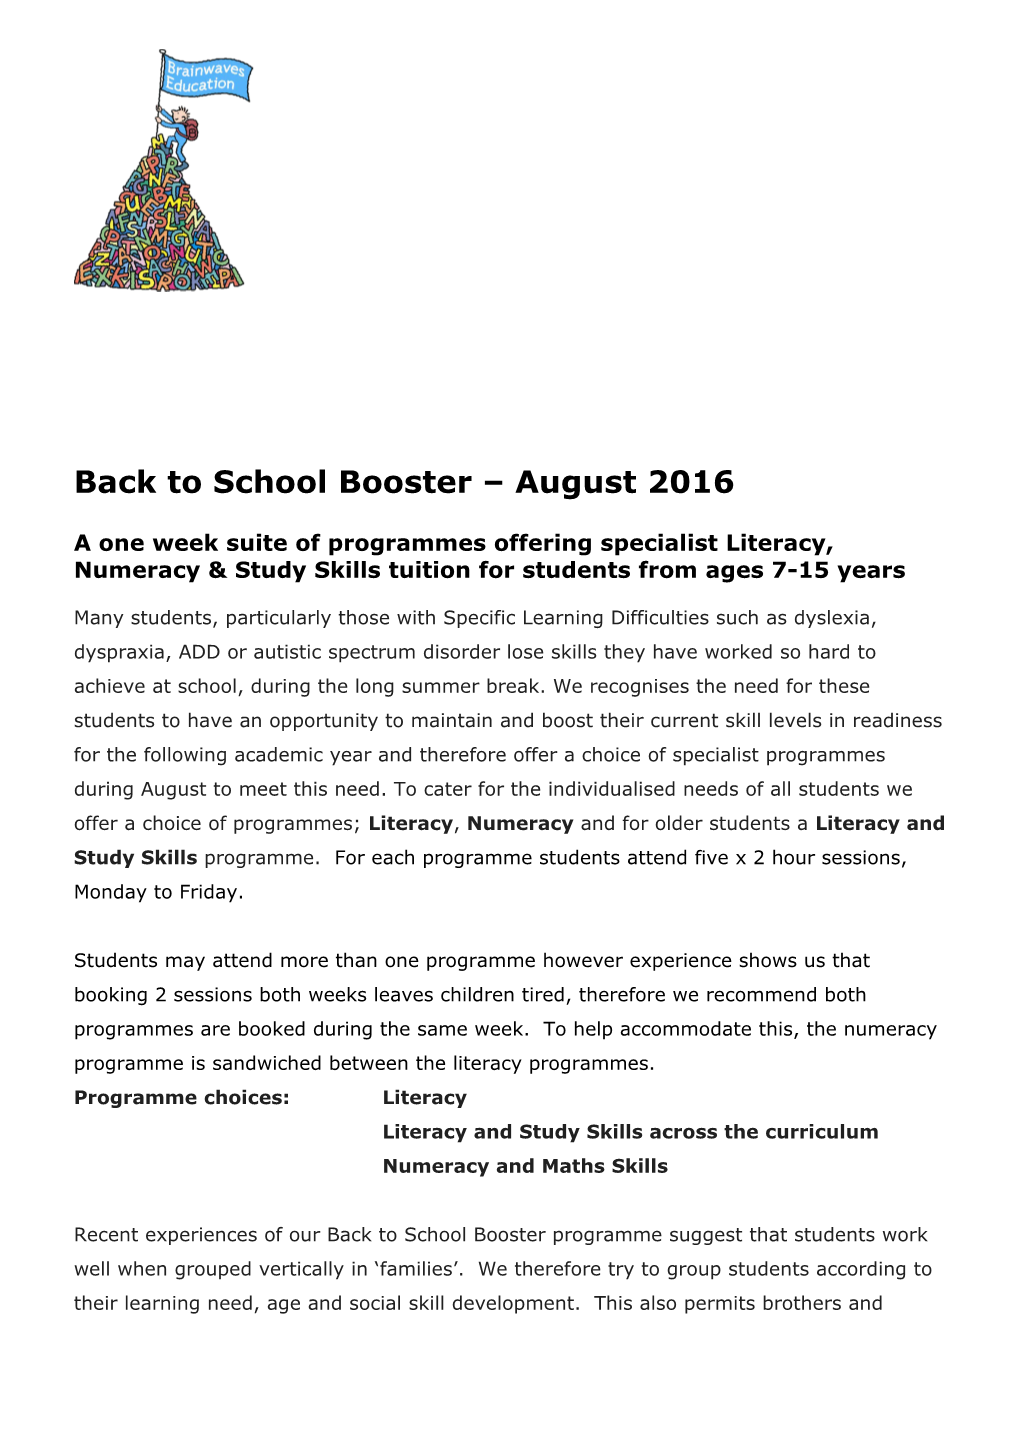 Back to School Booster August 2016